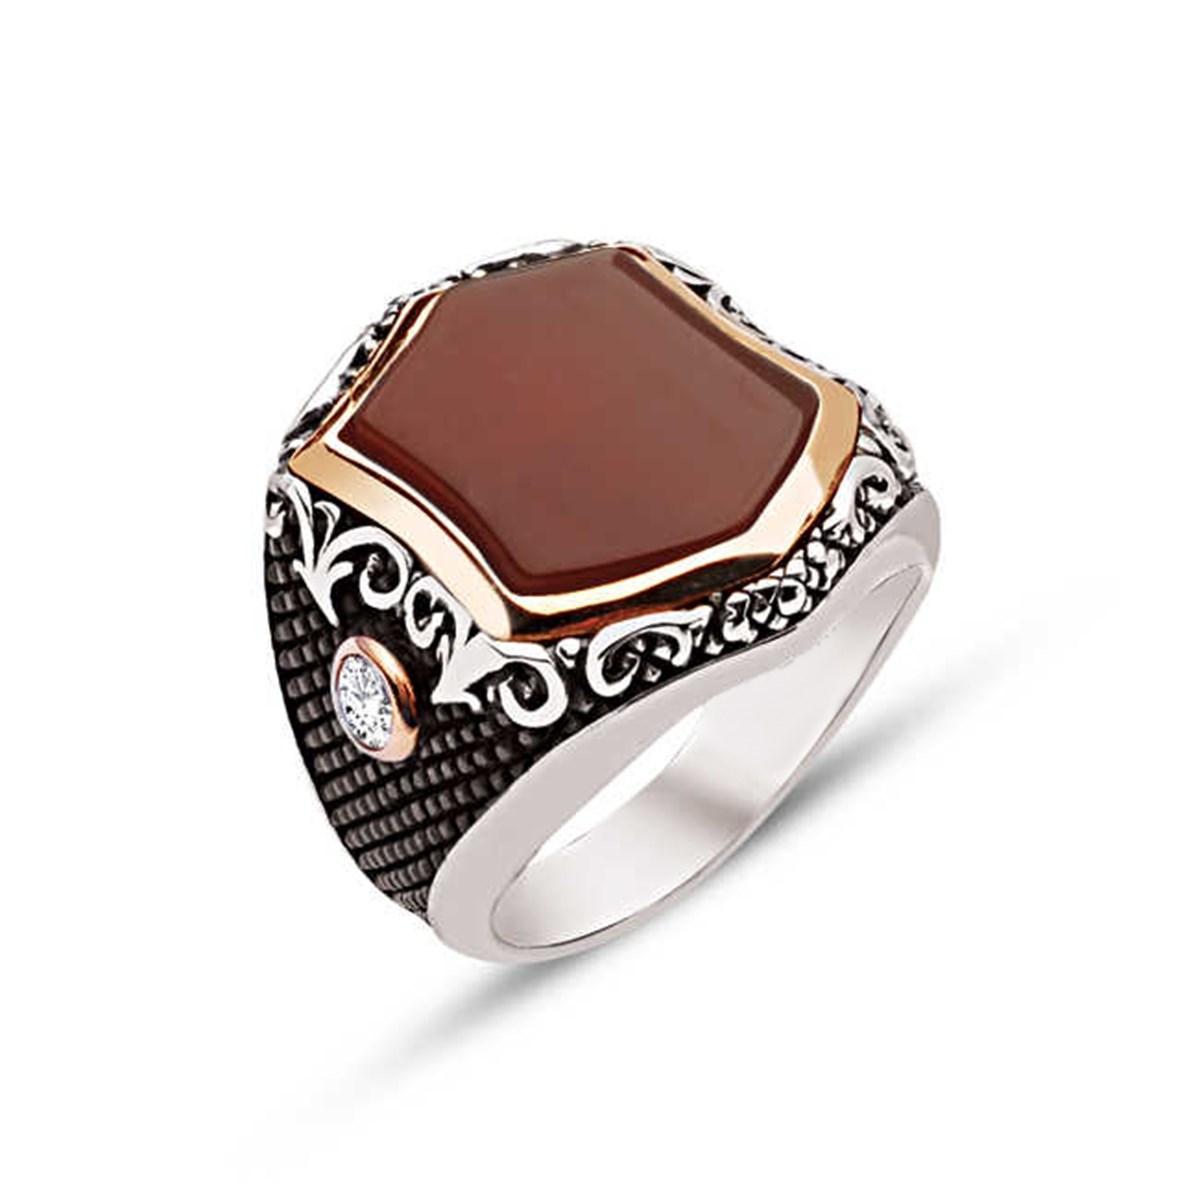 Silver Special Cut Agate Stone Men's Ring